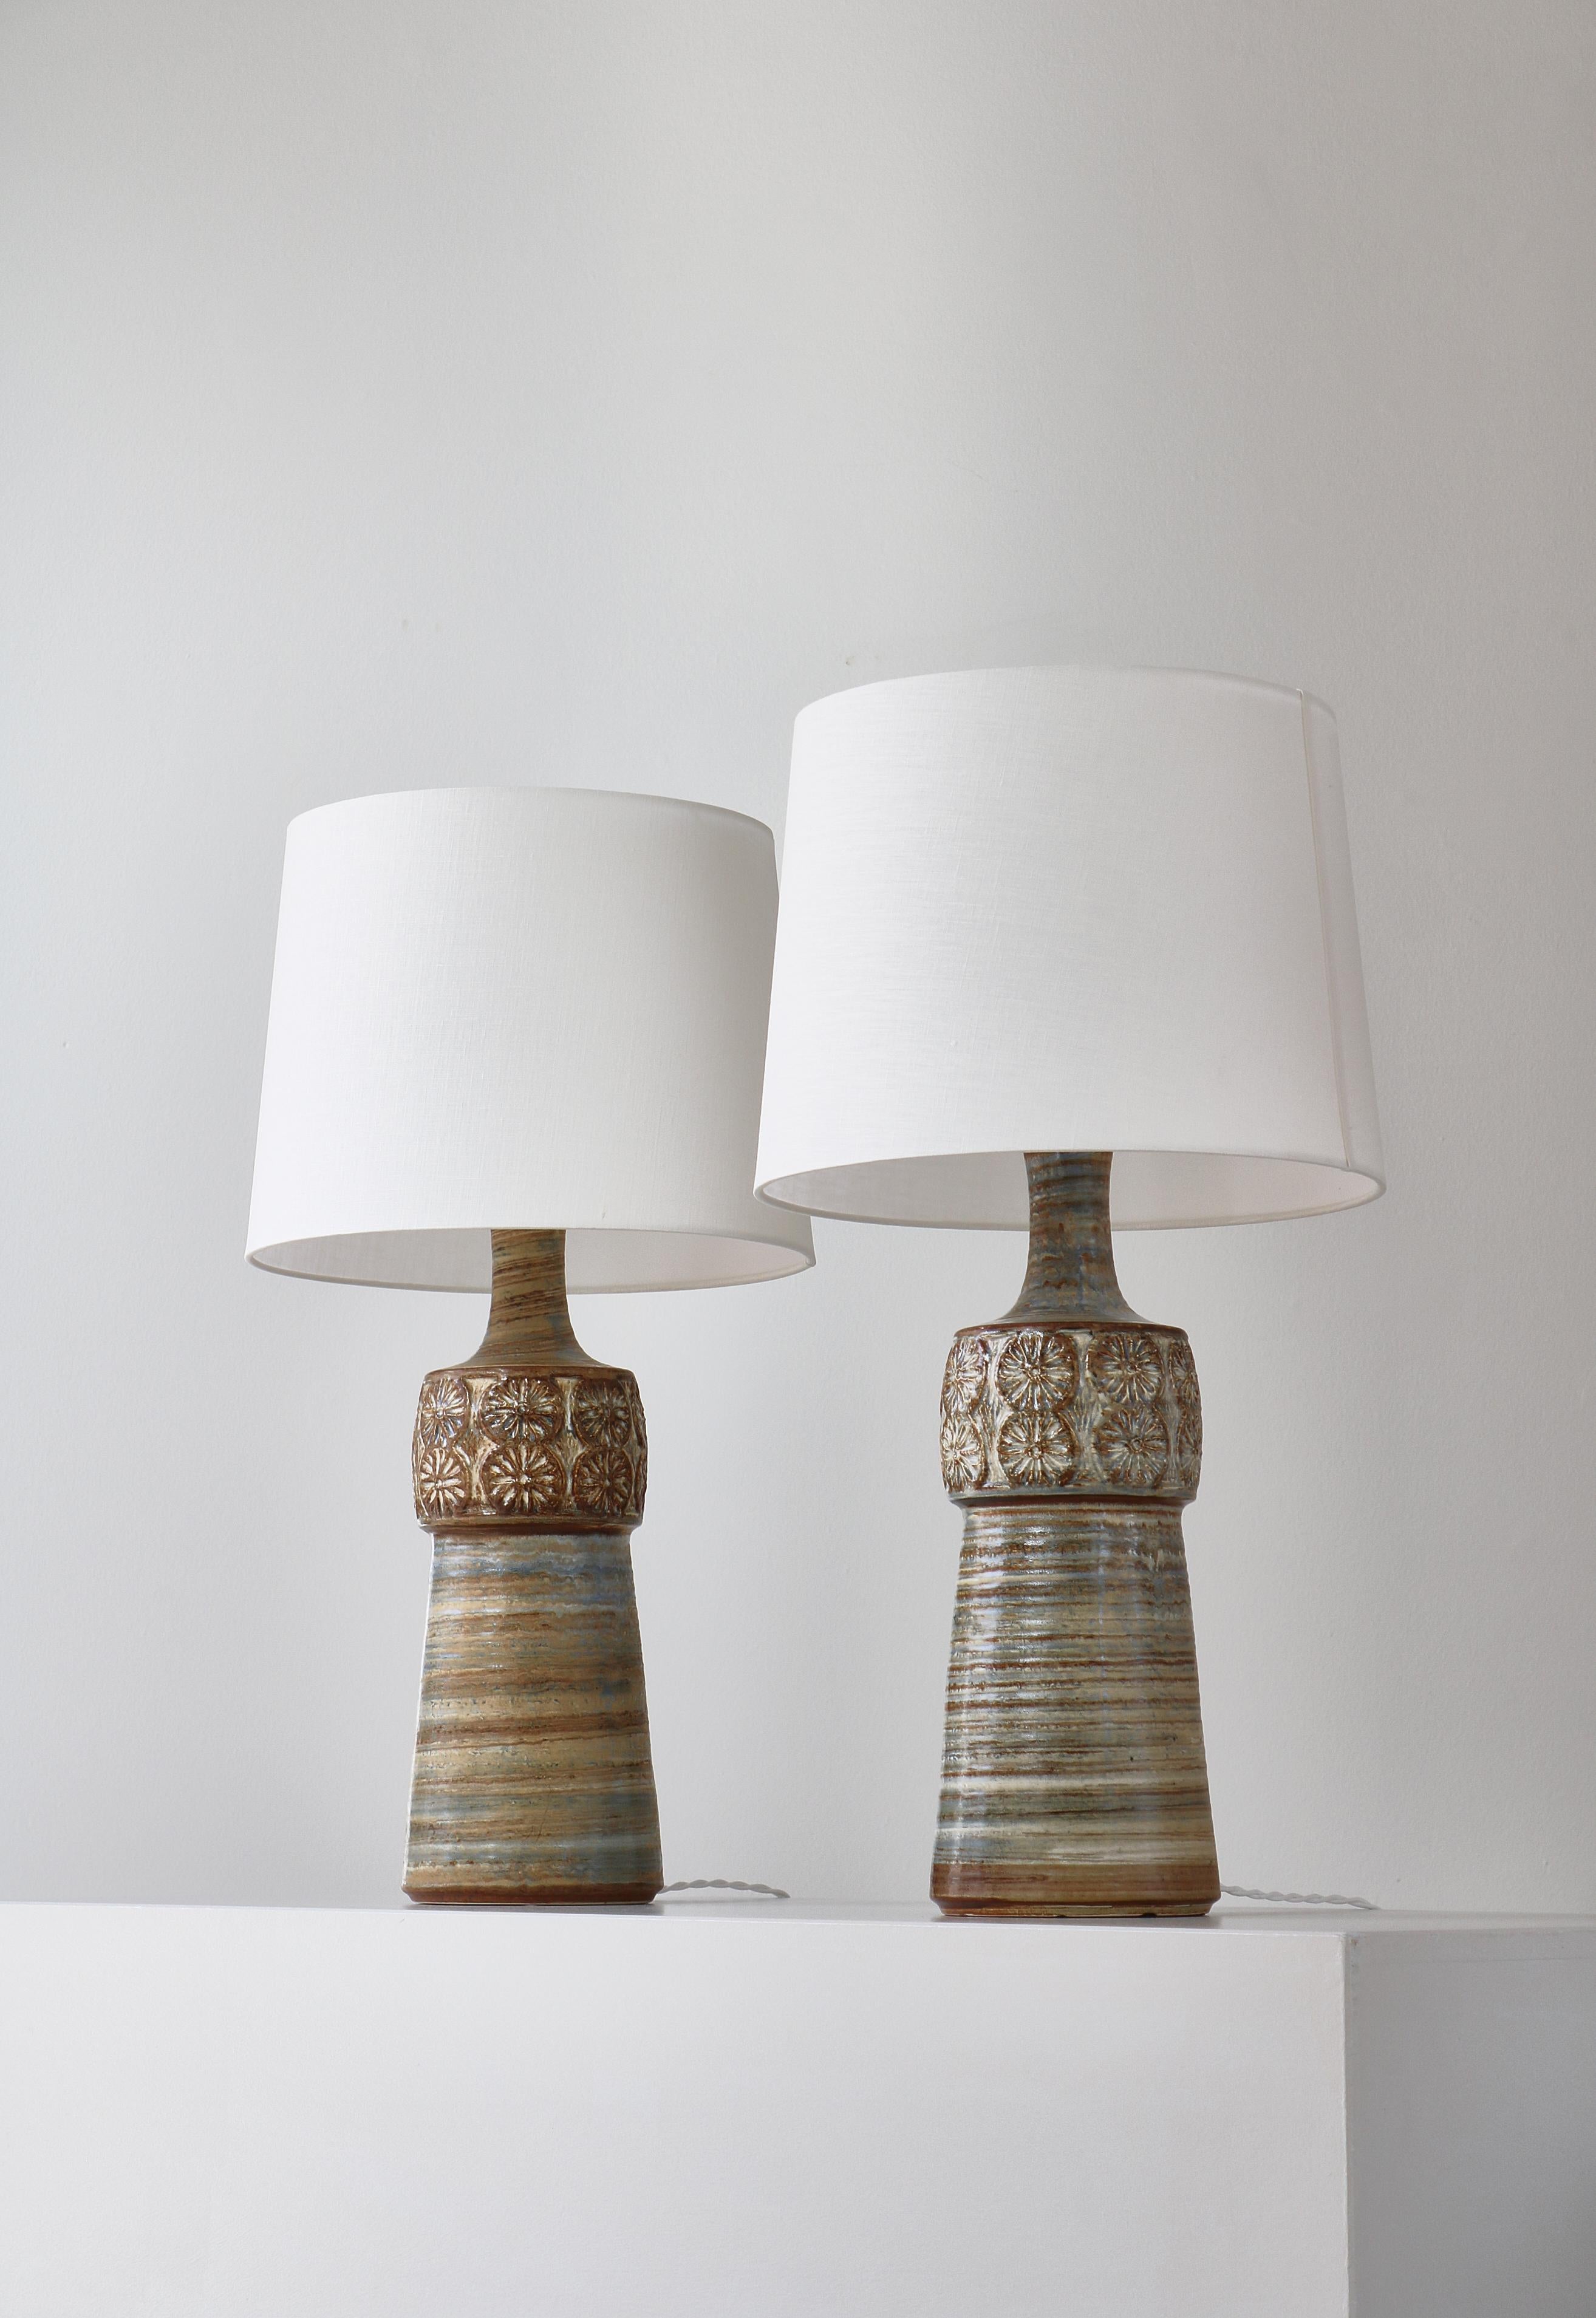 Wonderful pair of large handmade stoneware table lamps made in Denmark in the 1960s at the Søholm Stoneware workshop in Bornholm. Equipped with light shades in flax linen.

Søholm Stentøj (stoneware) is one of the most revered names in Danish